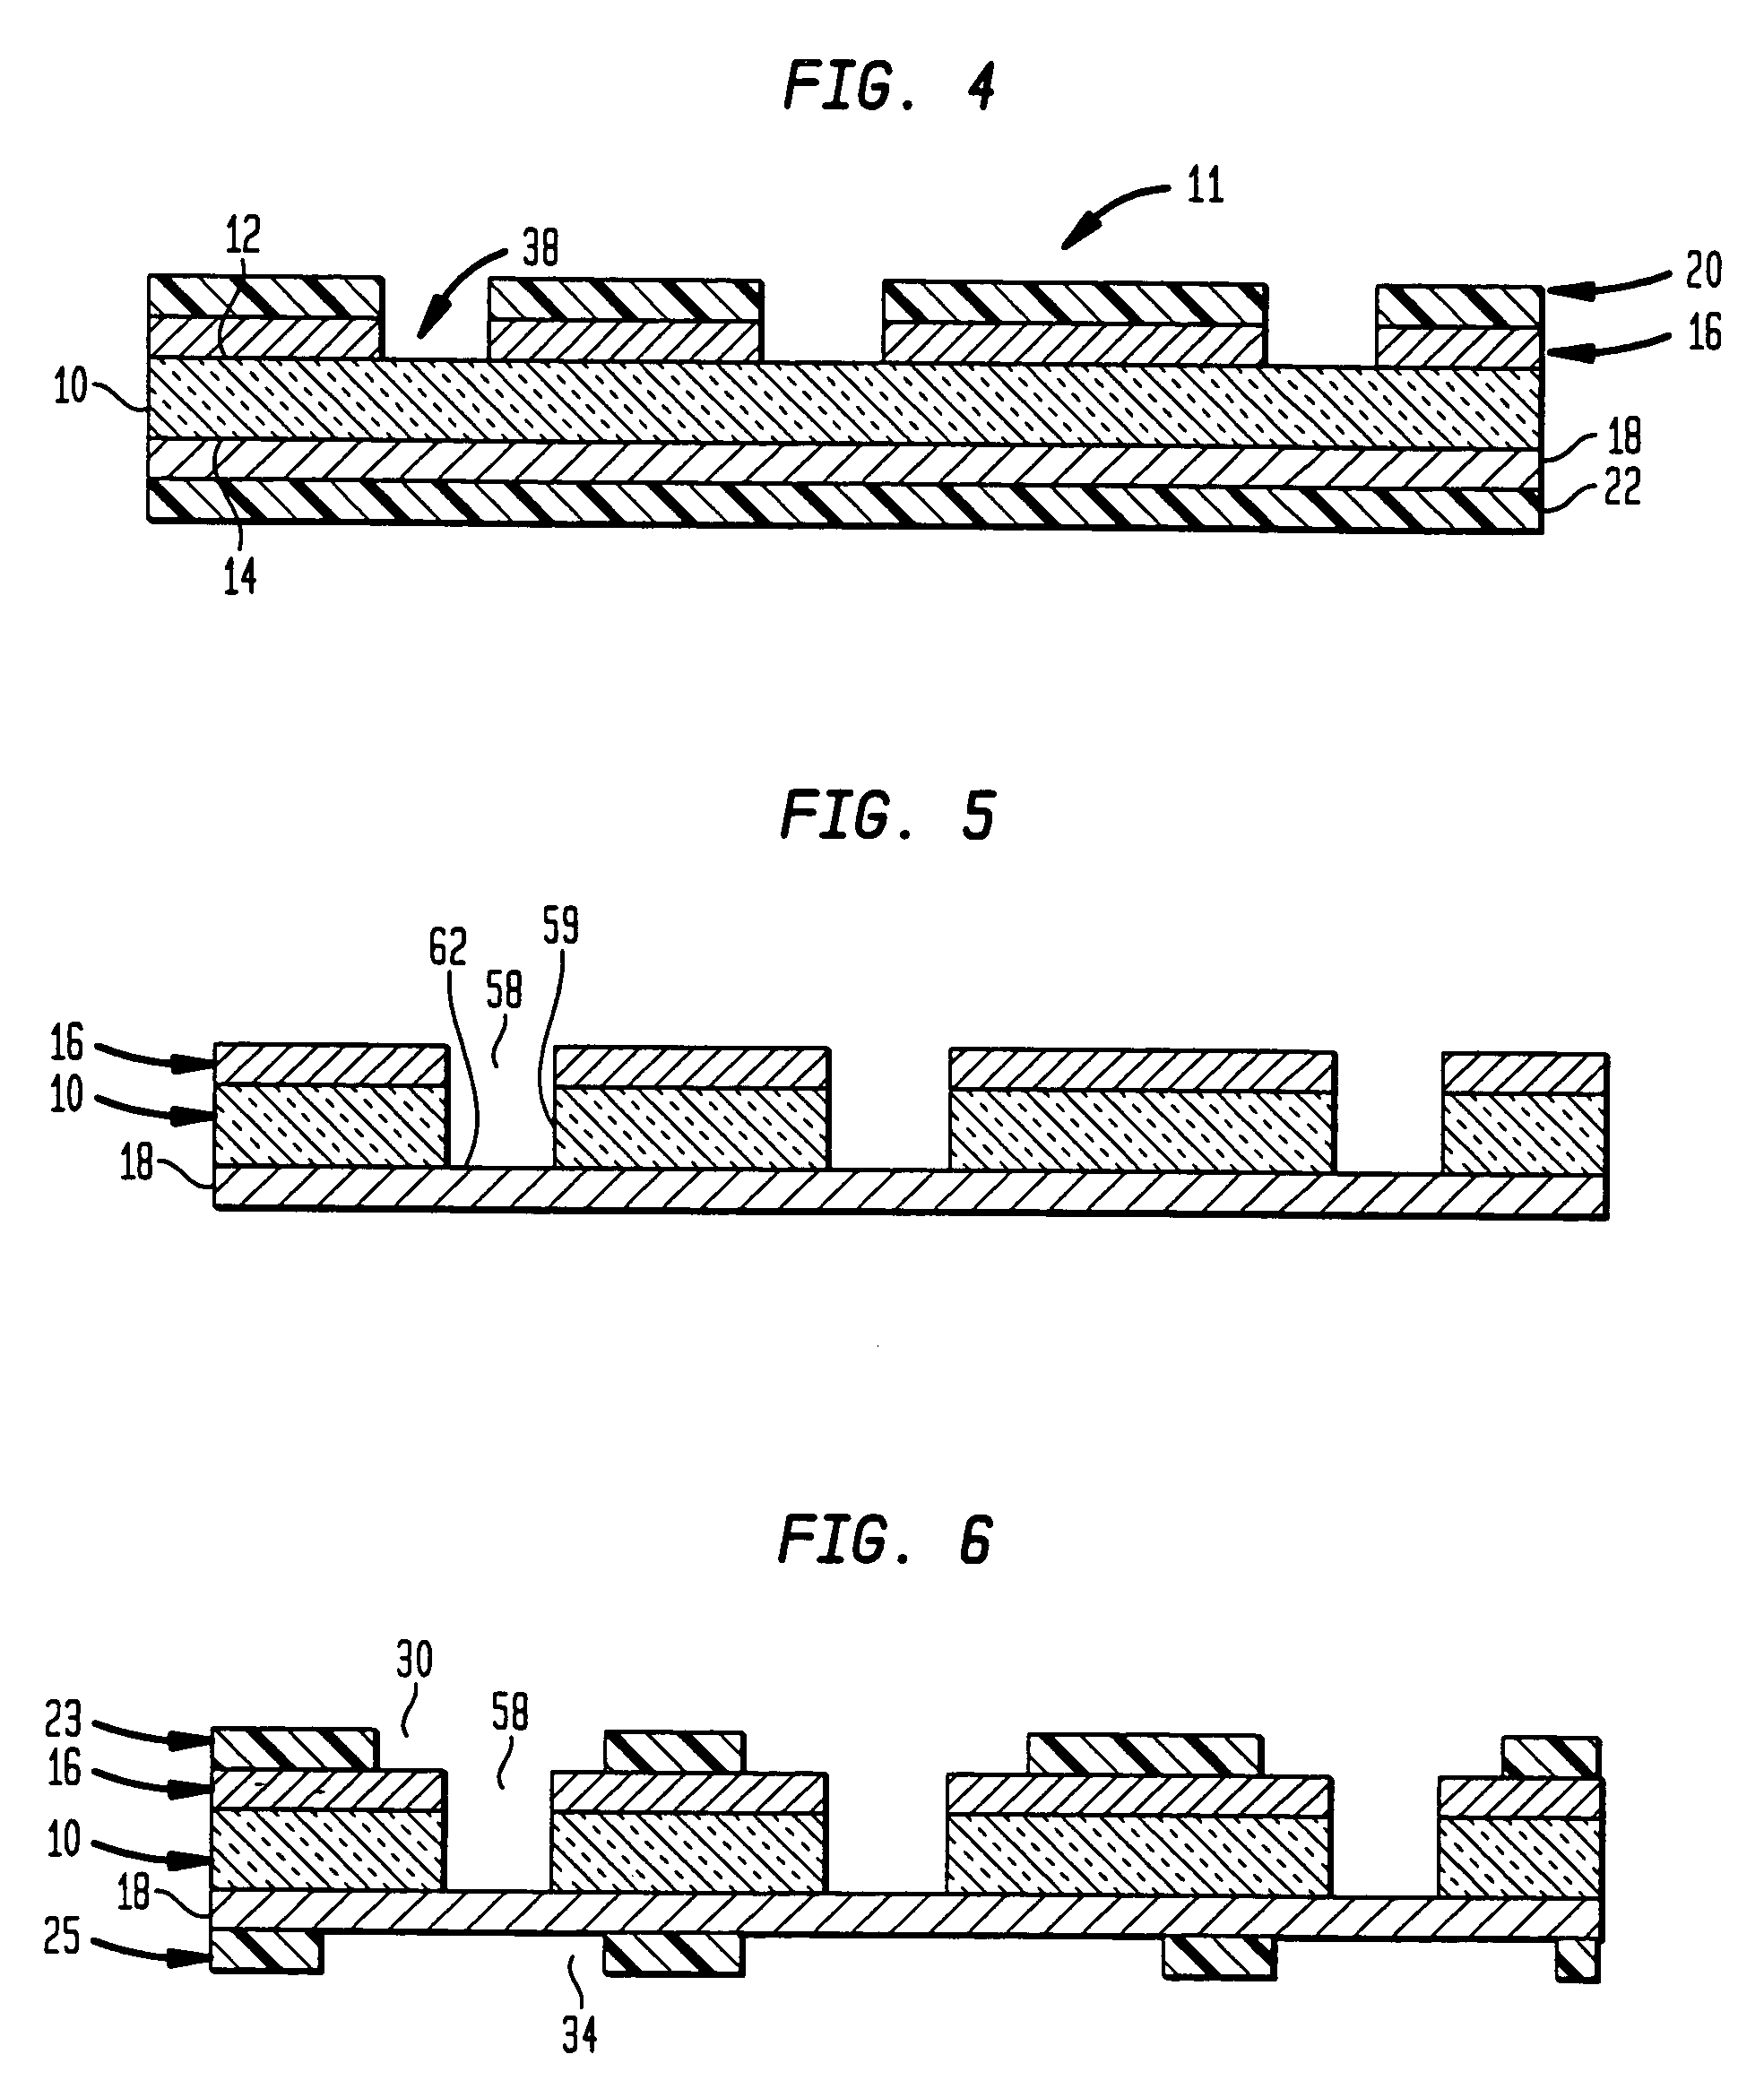 Method of making a microelectronic package